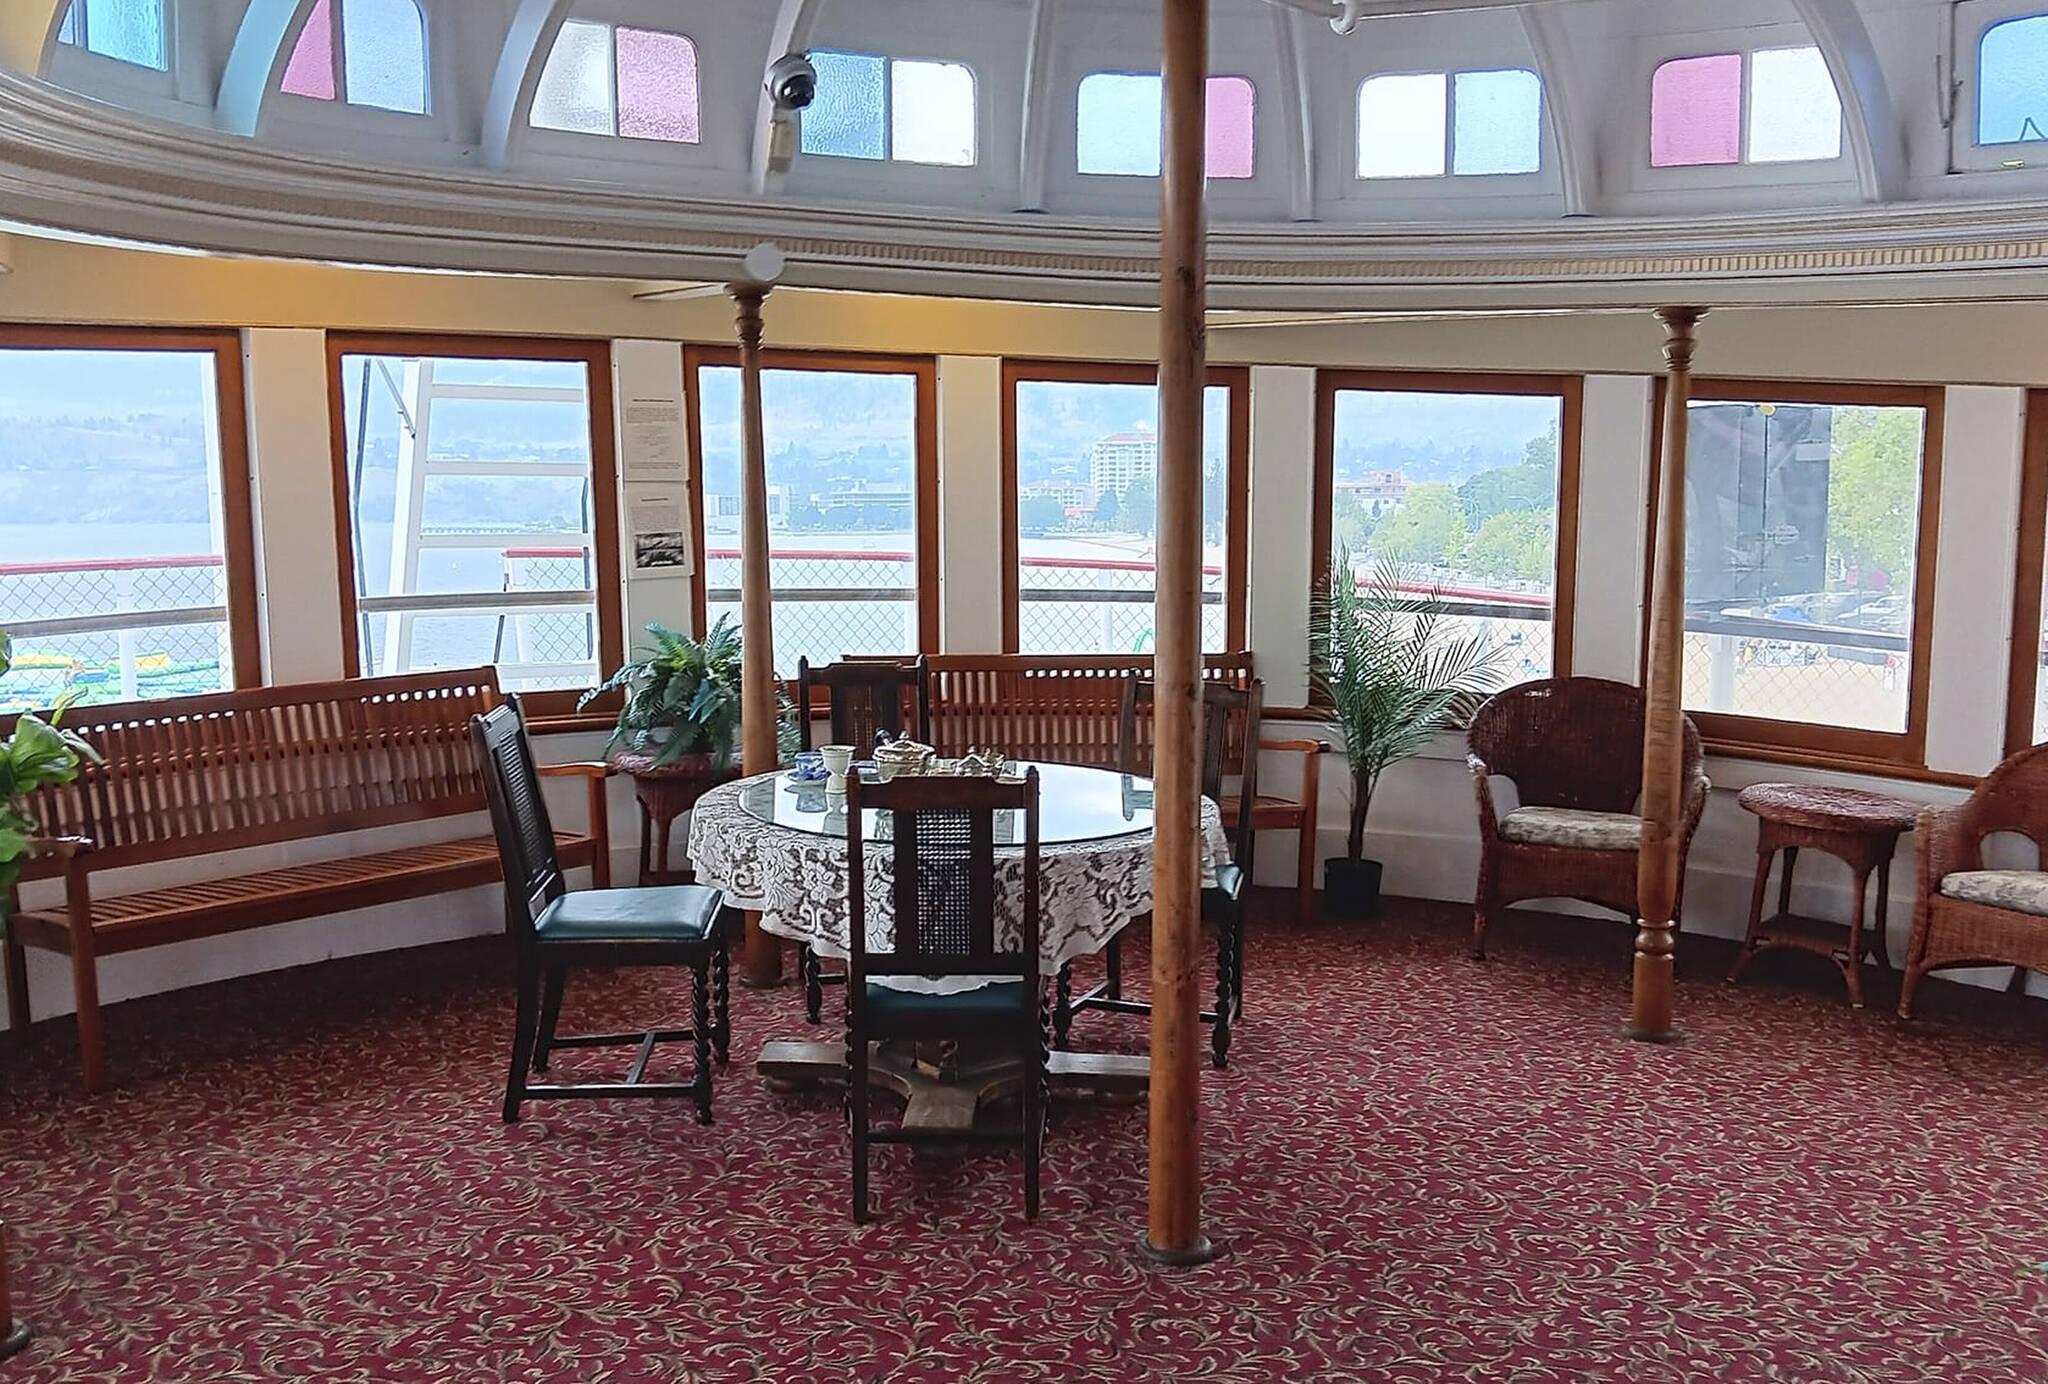 The SS Soumous was a classy way to travel along Okanagan Lake back in the day.